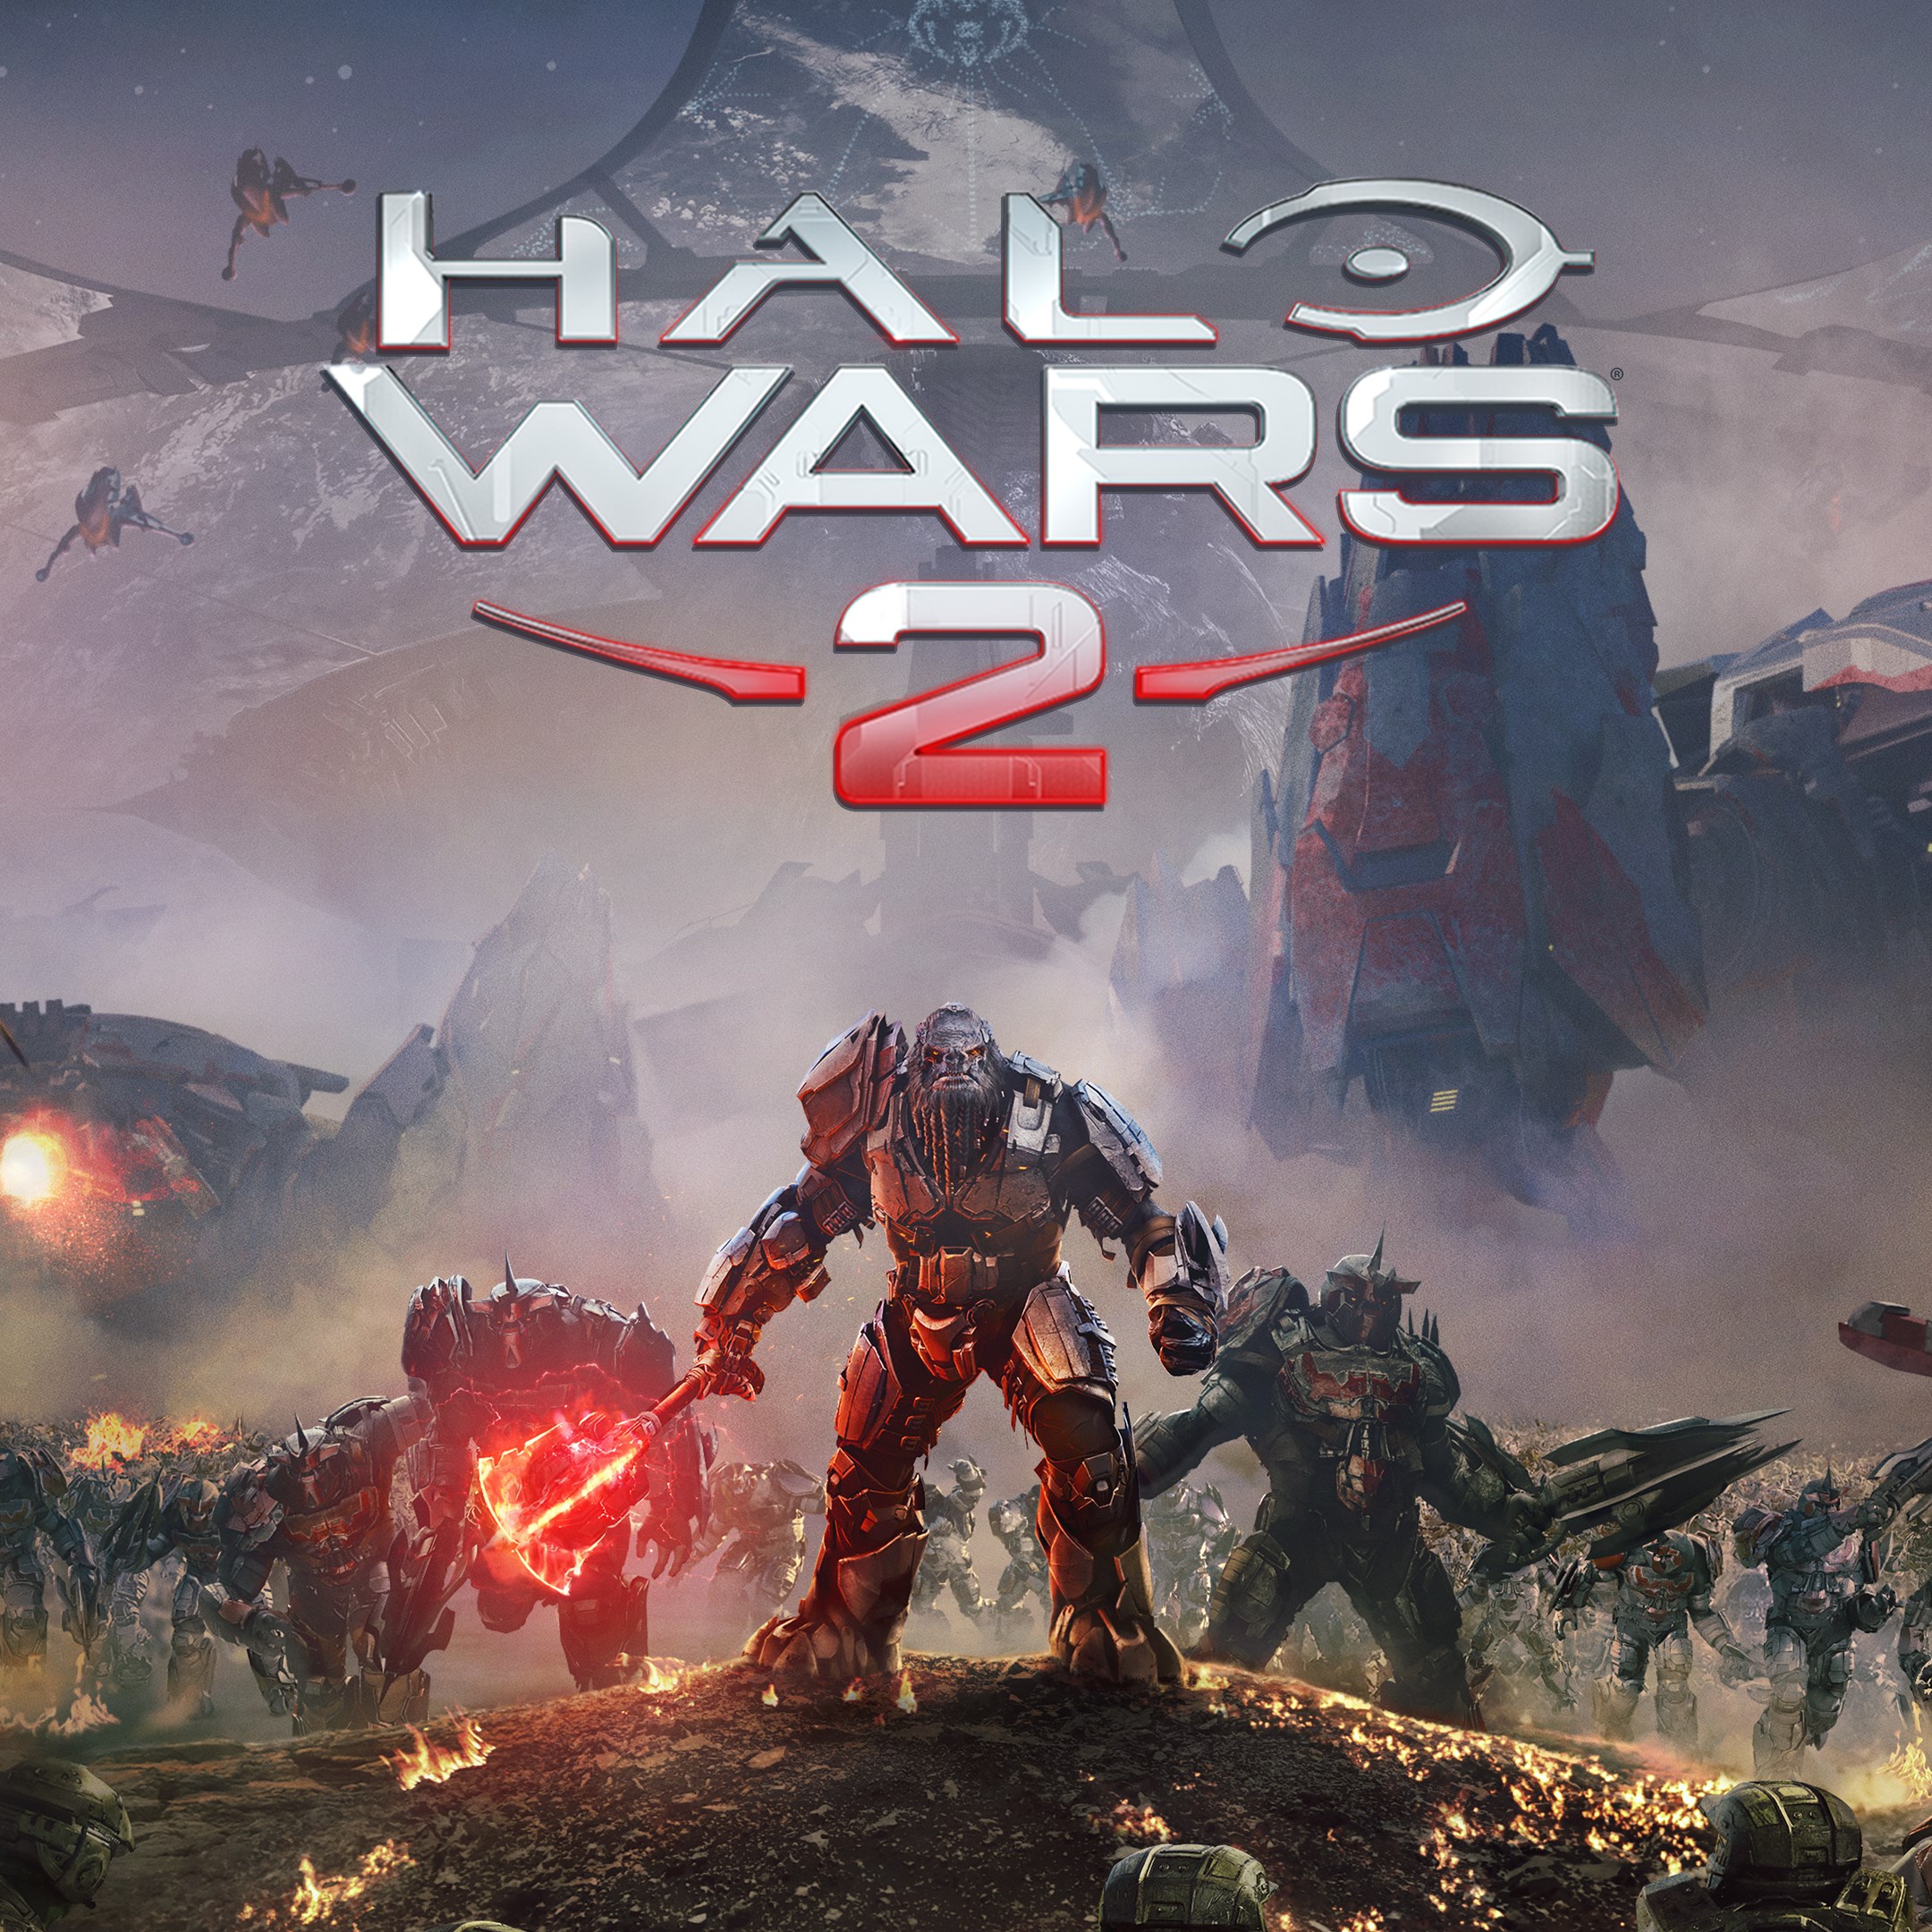 Halo Wars 2 technical specifications for laptop